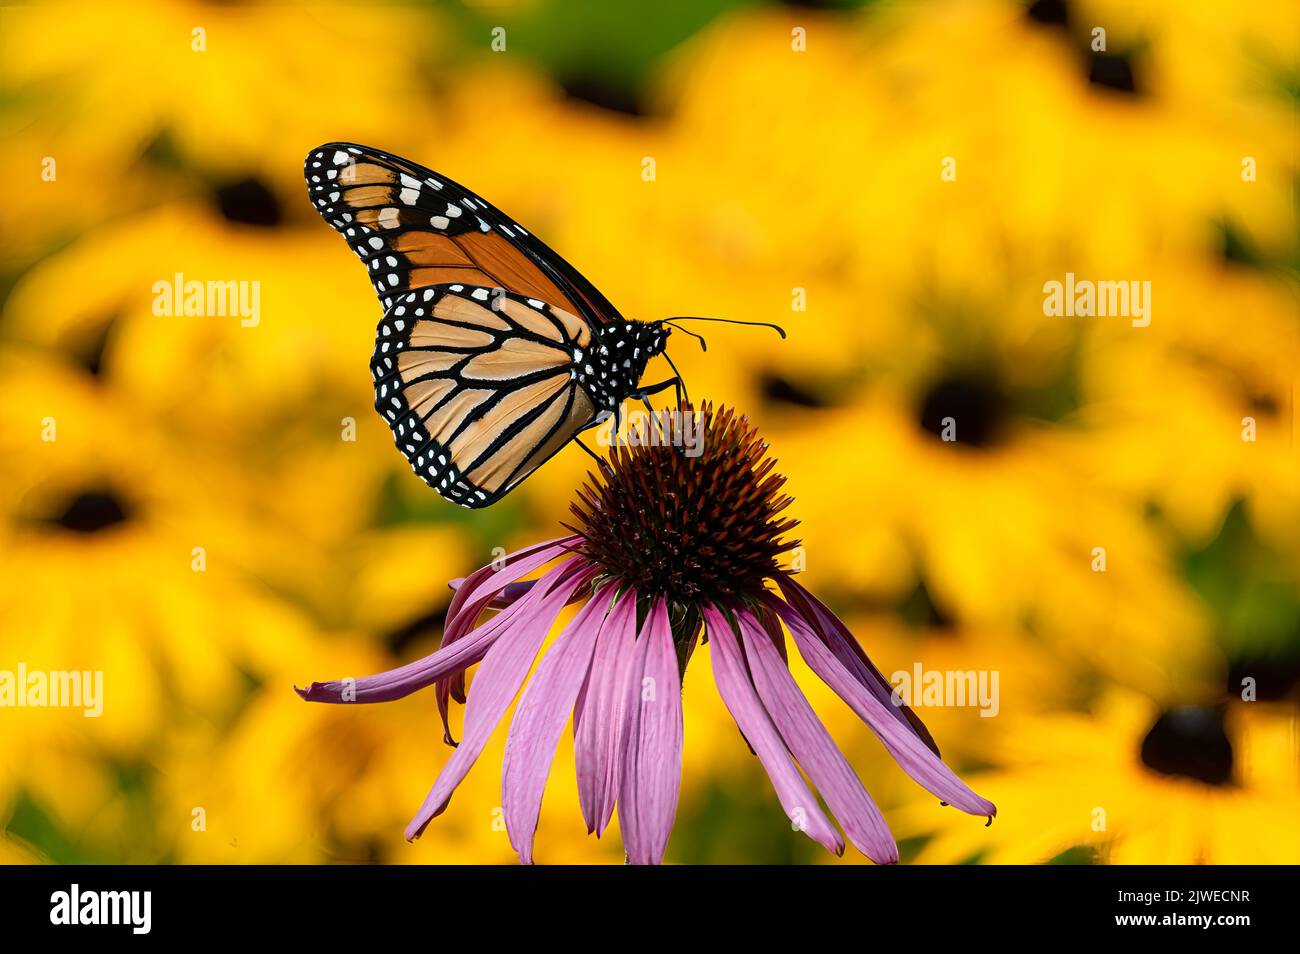 A Monarch Butterfly, Danaus plexippus, pollinating a purple cone flower in a garden in Speculator, NY USA with a bright yellow Rudbeckia background. Stock Photo